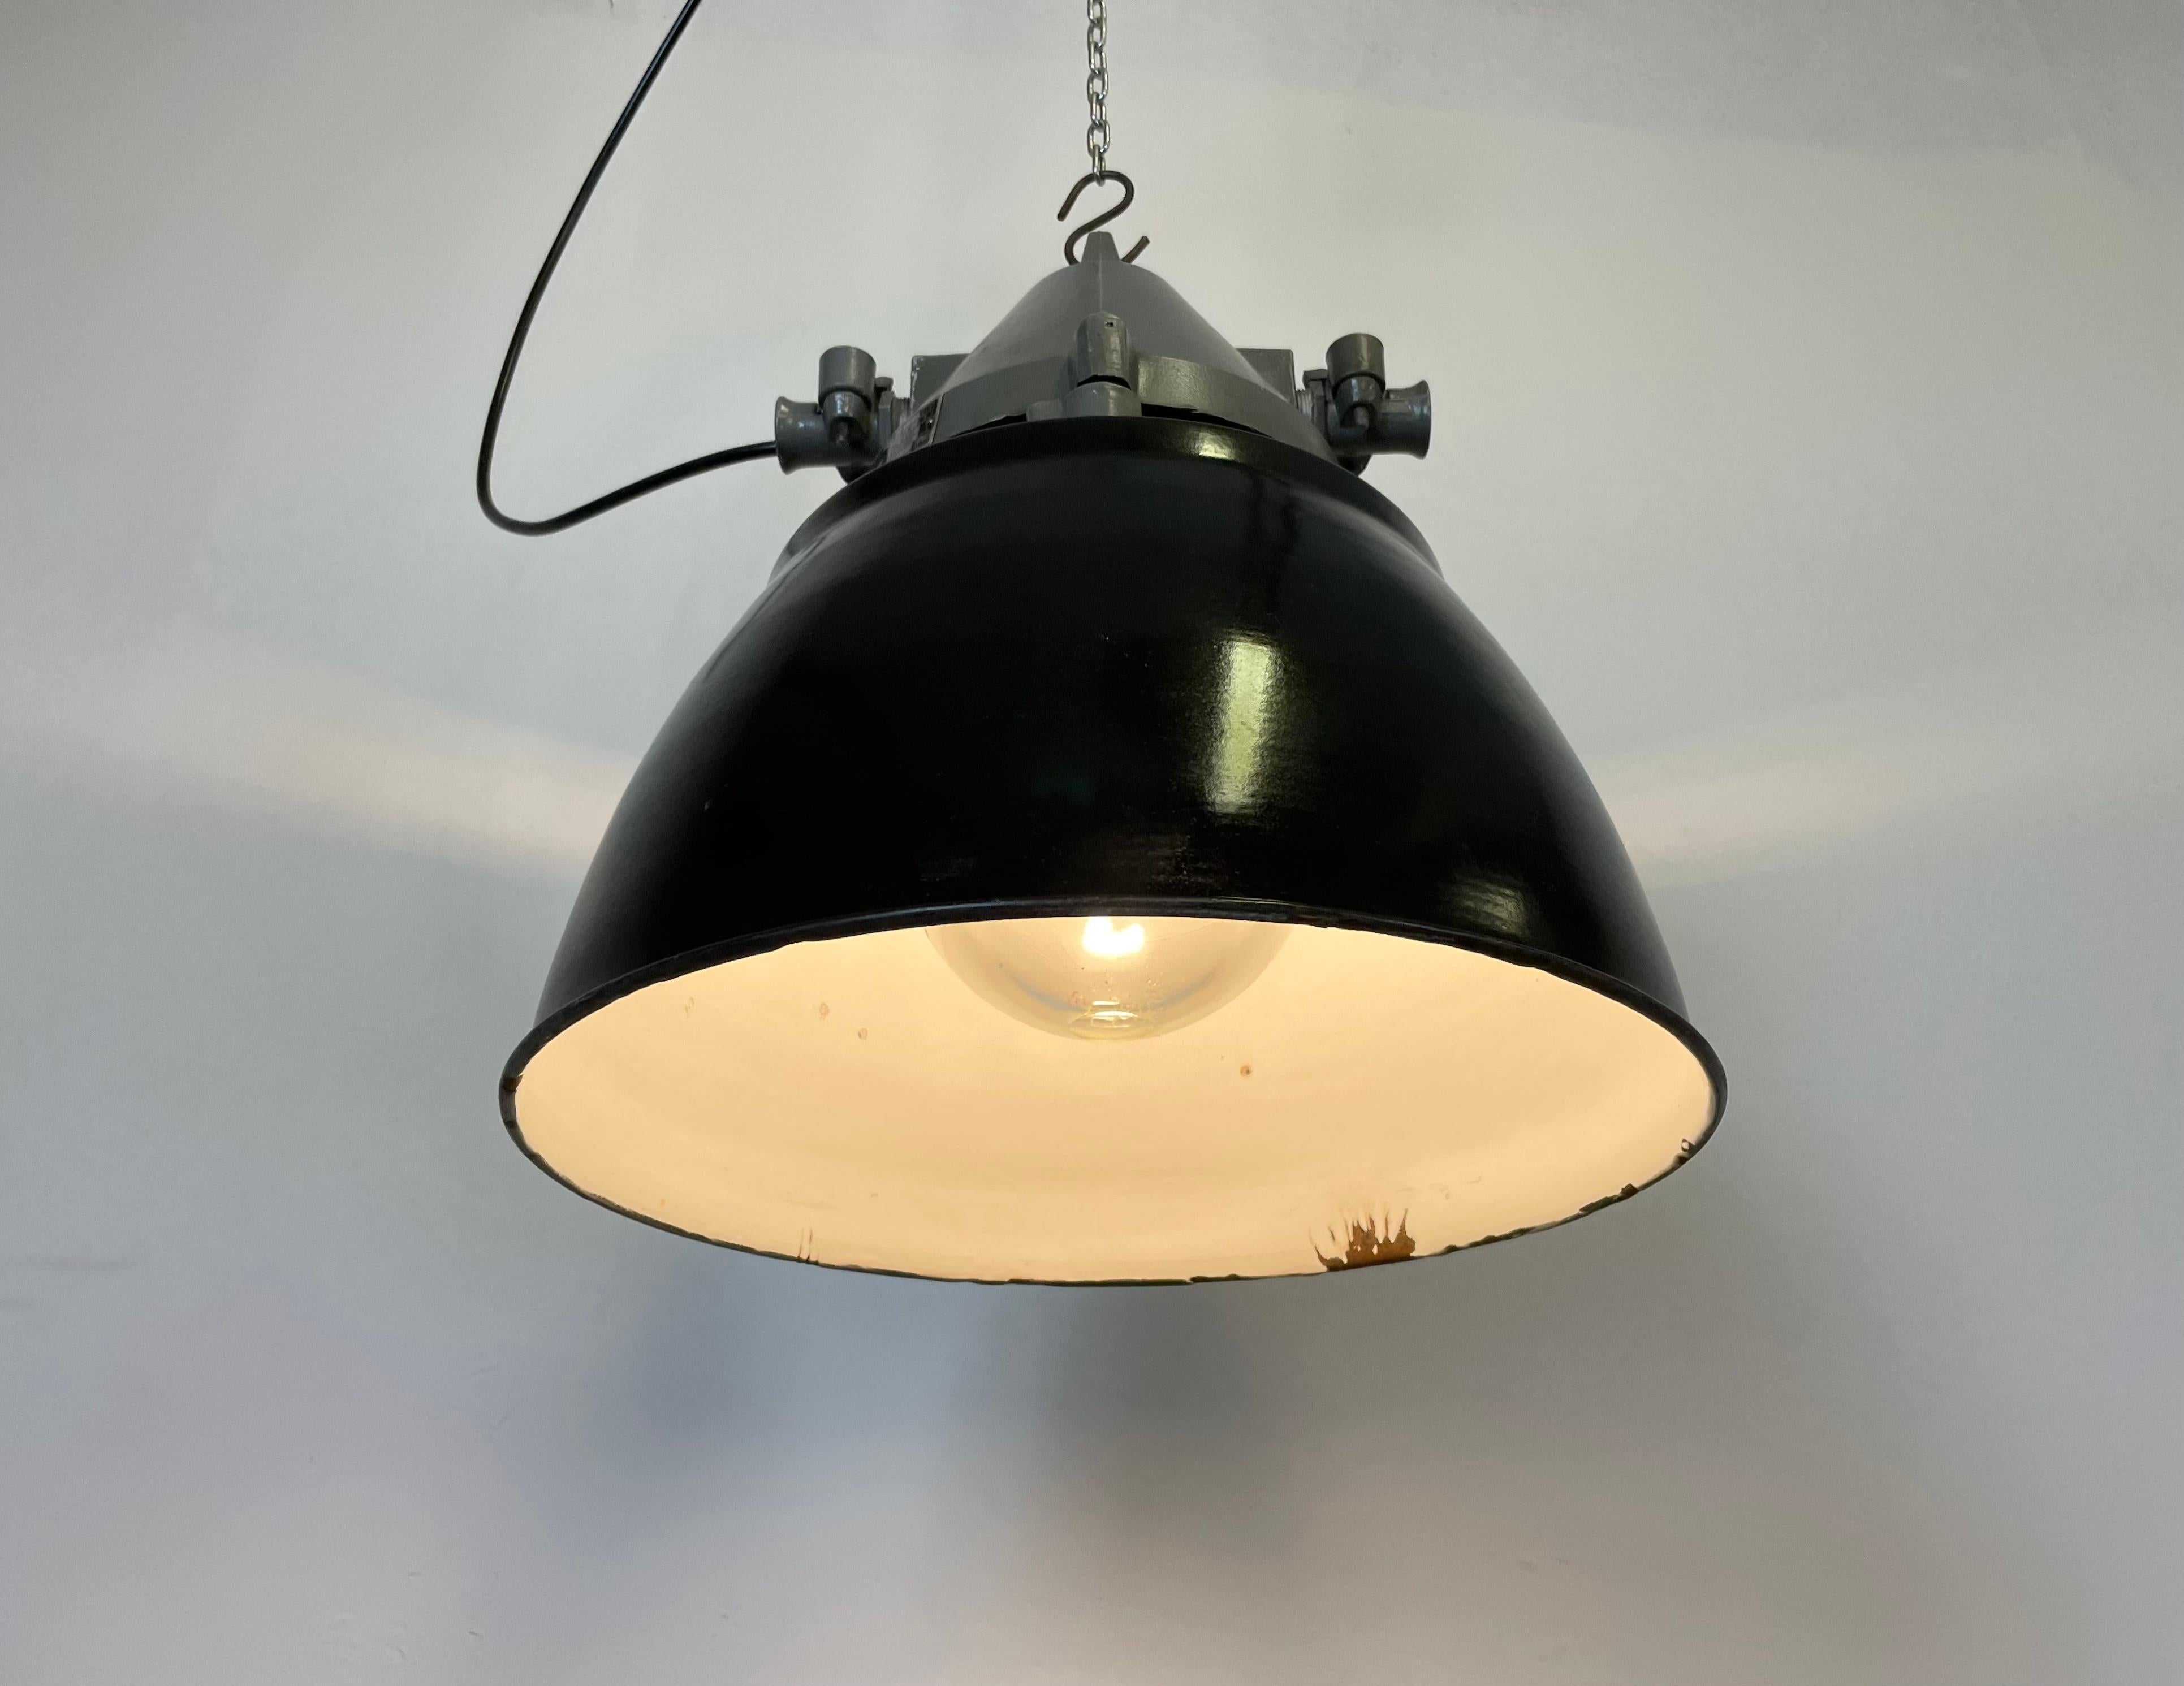 Dark Grey Explosion Proof Lamp with Black Enameled Shade, 1970s For Sale 6